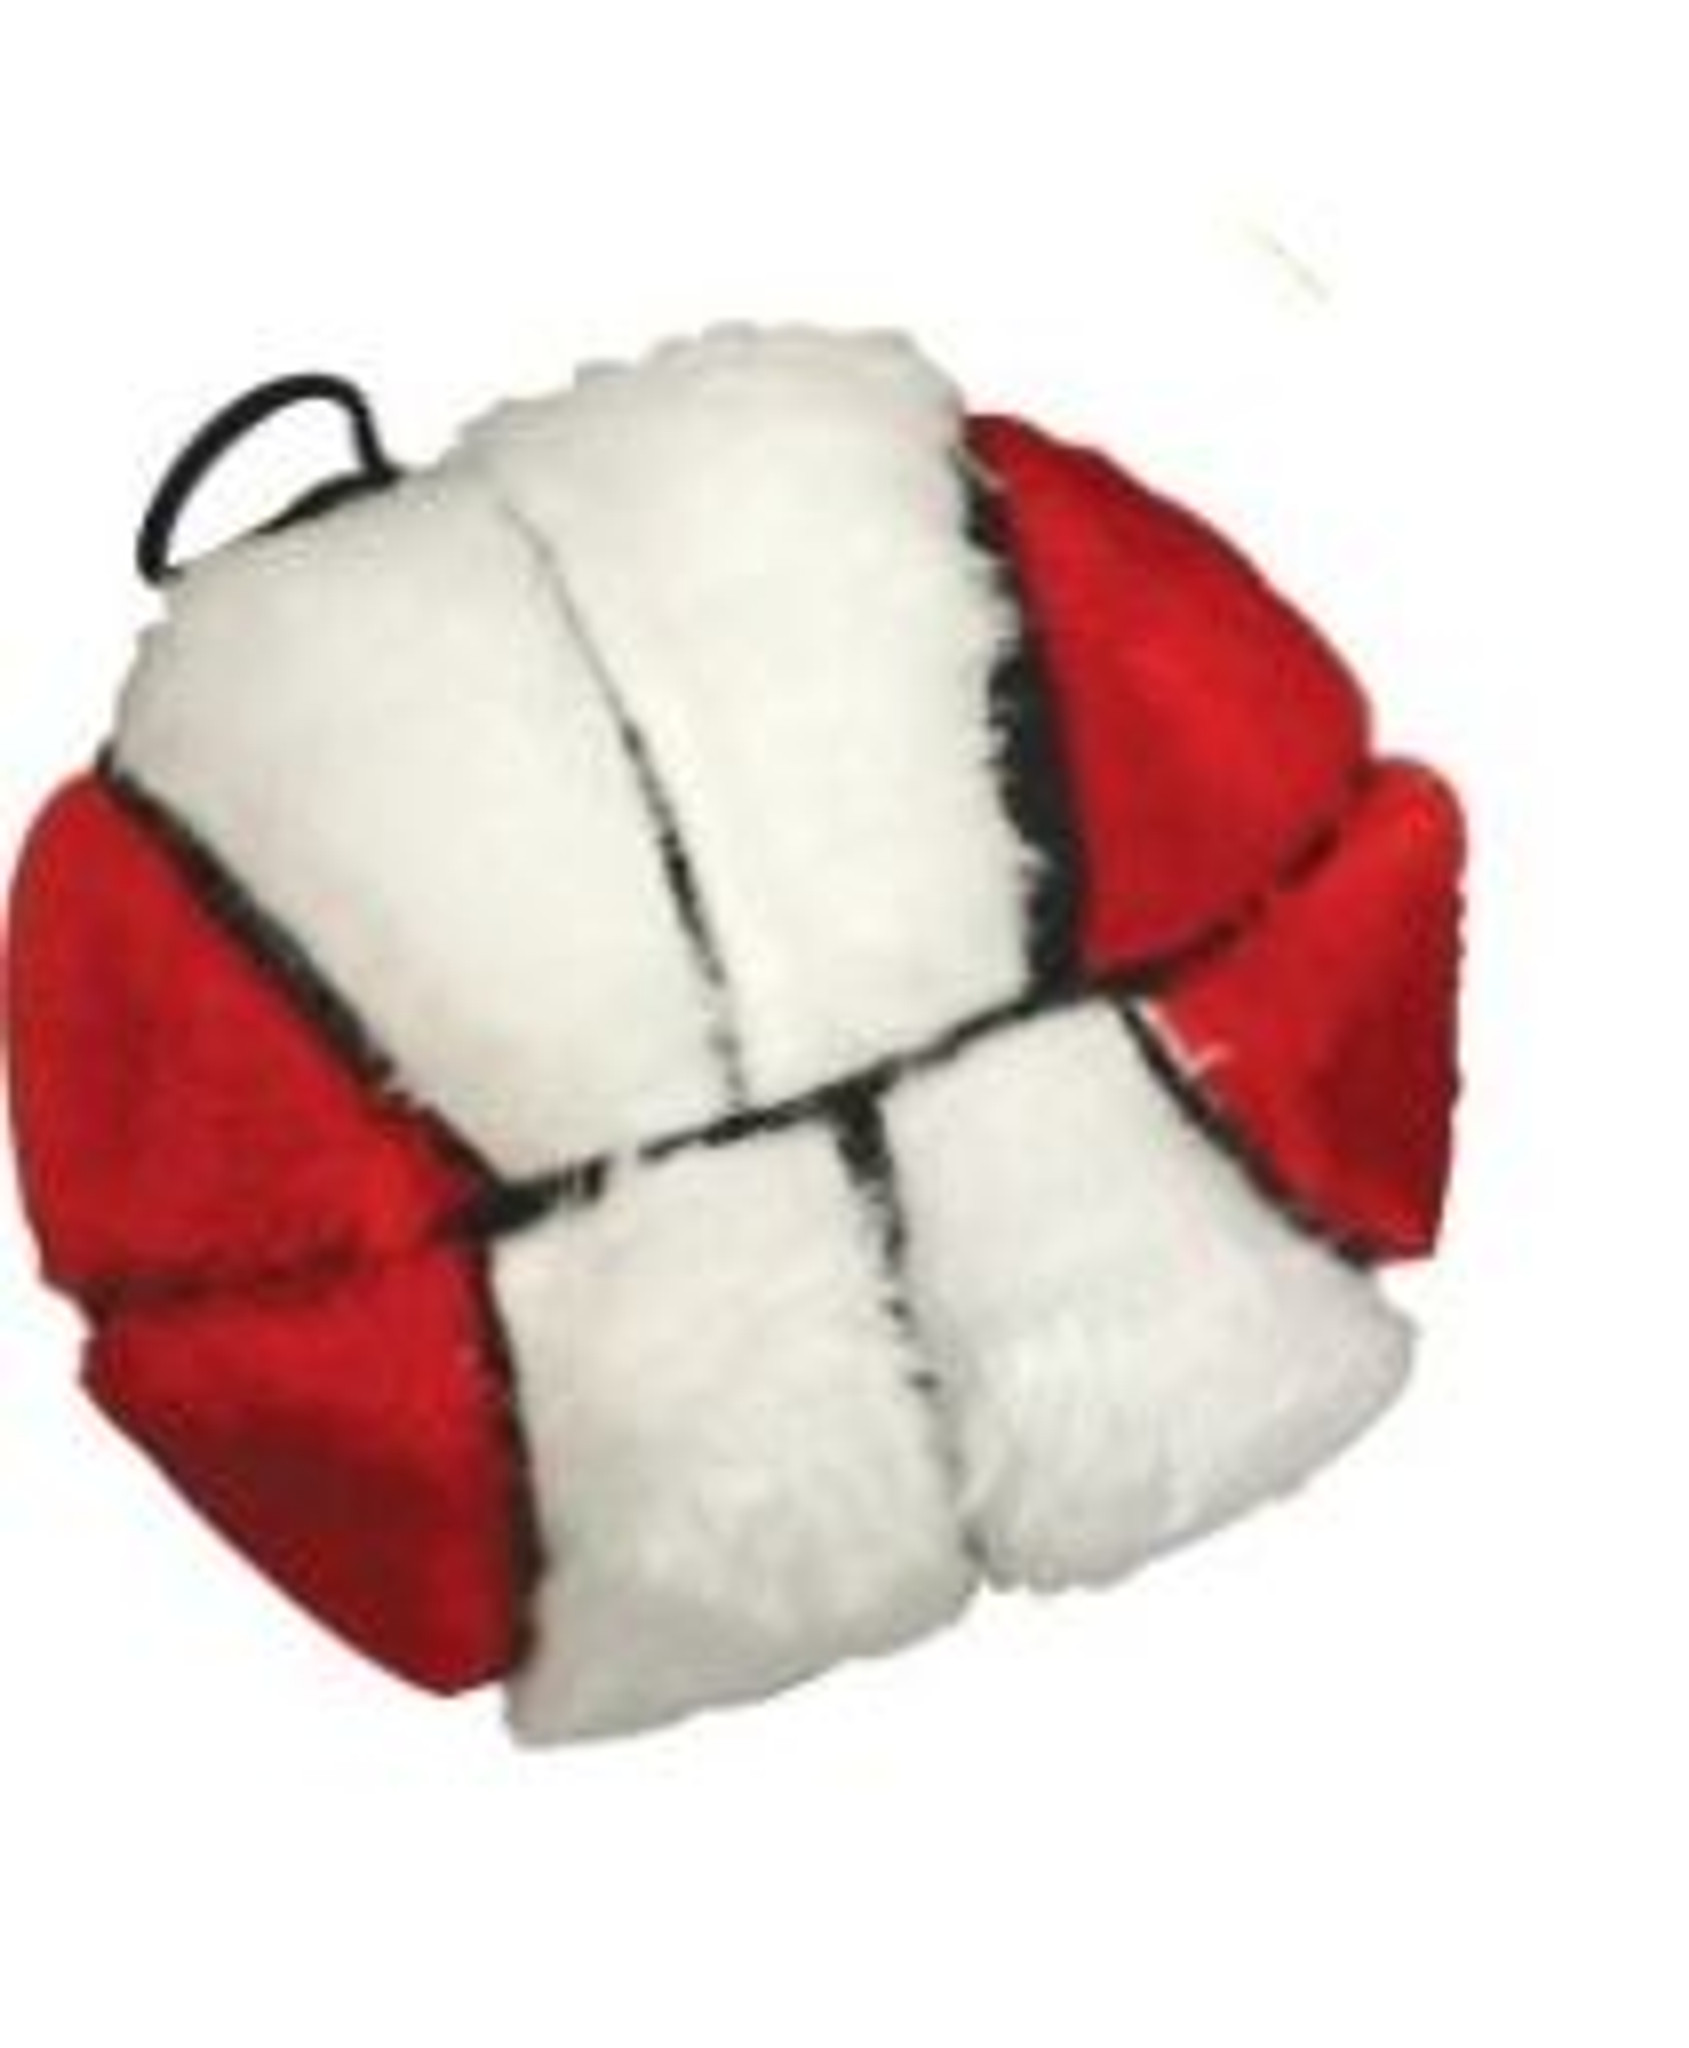 ETHICAL PET Football Squeaky Plush Dog Toy 